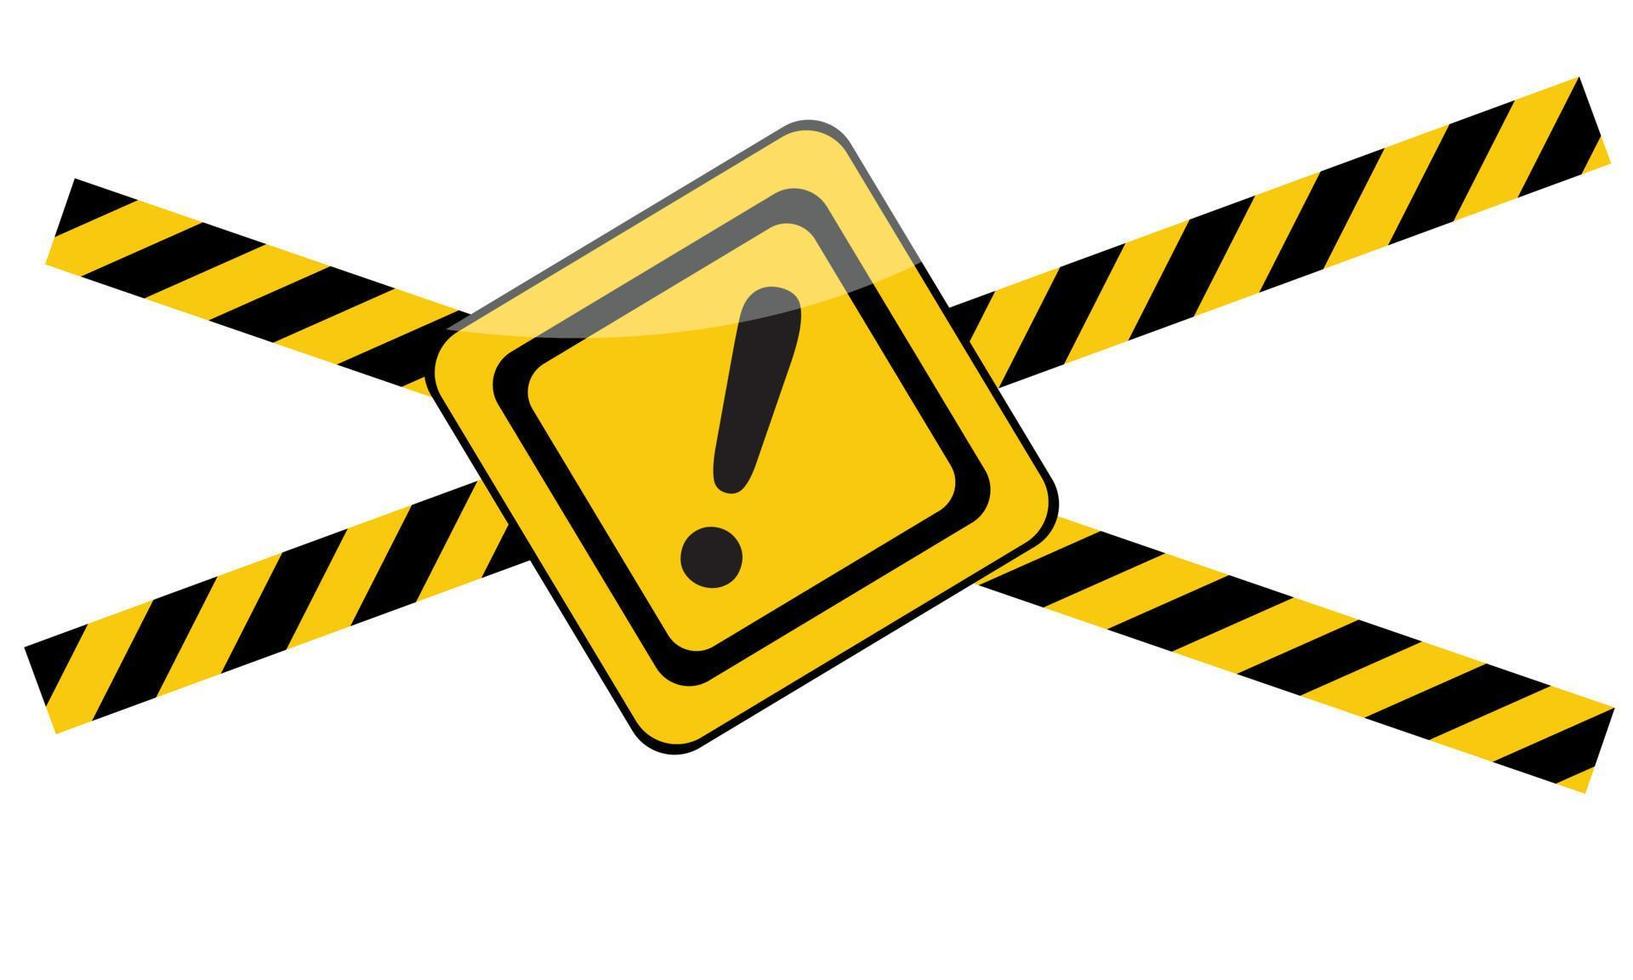 Warning sign is on white background vector